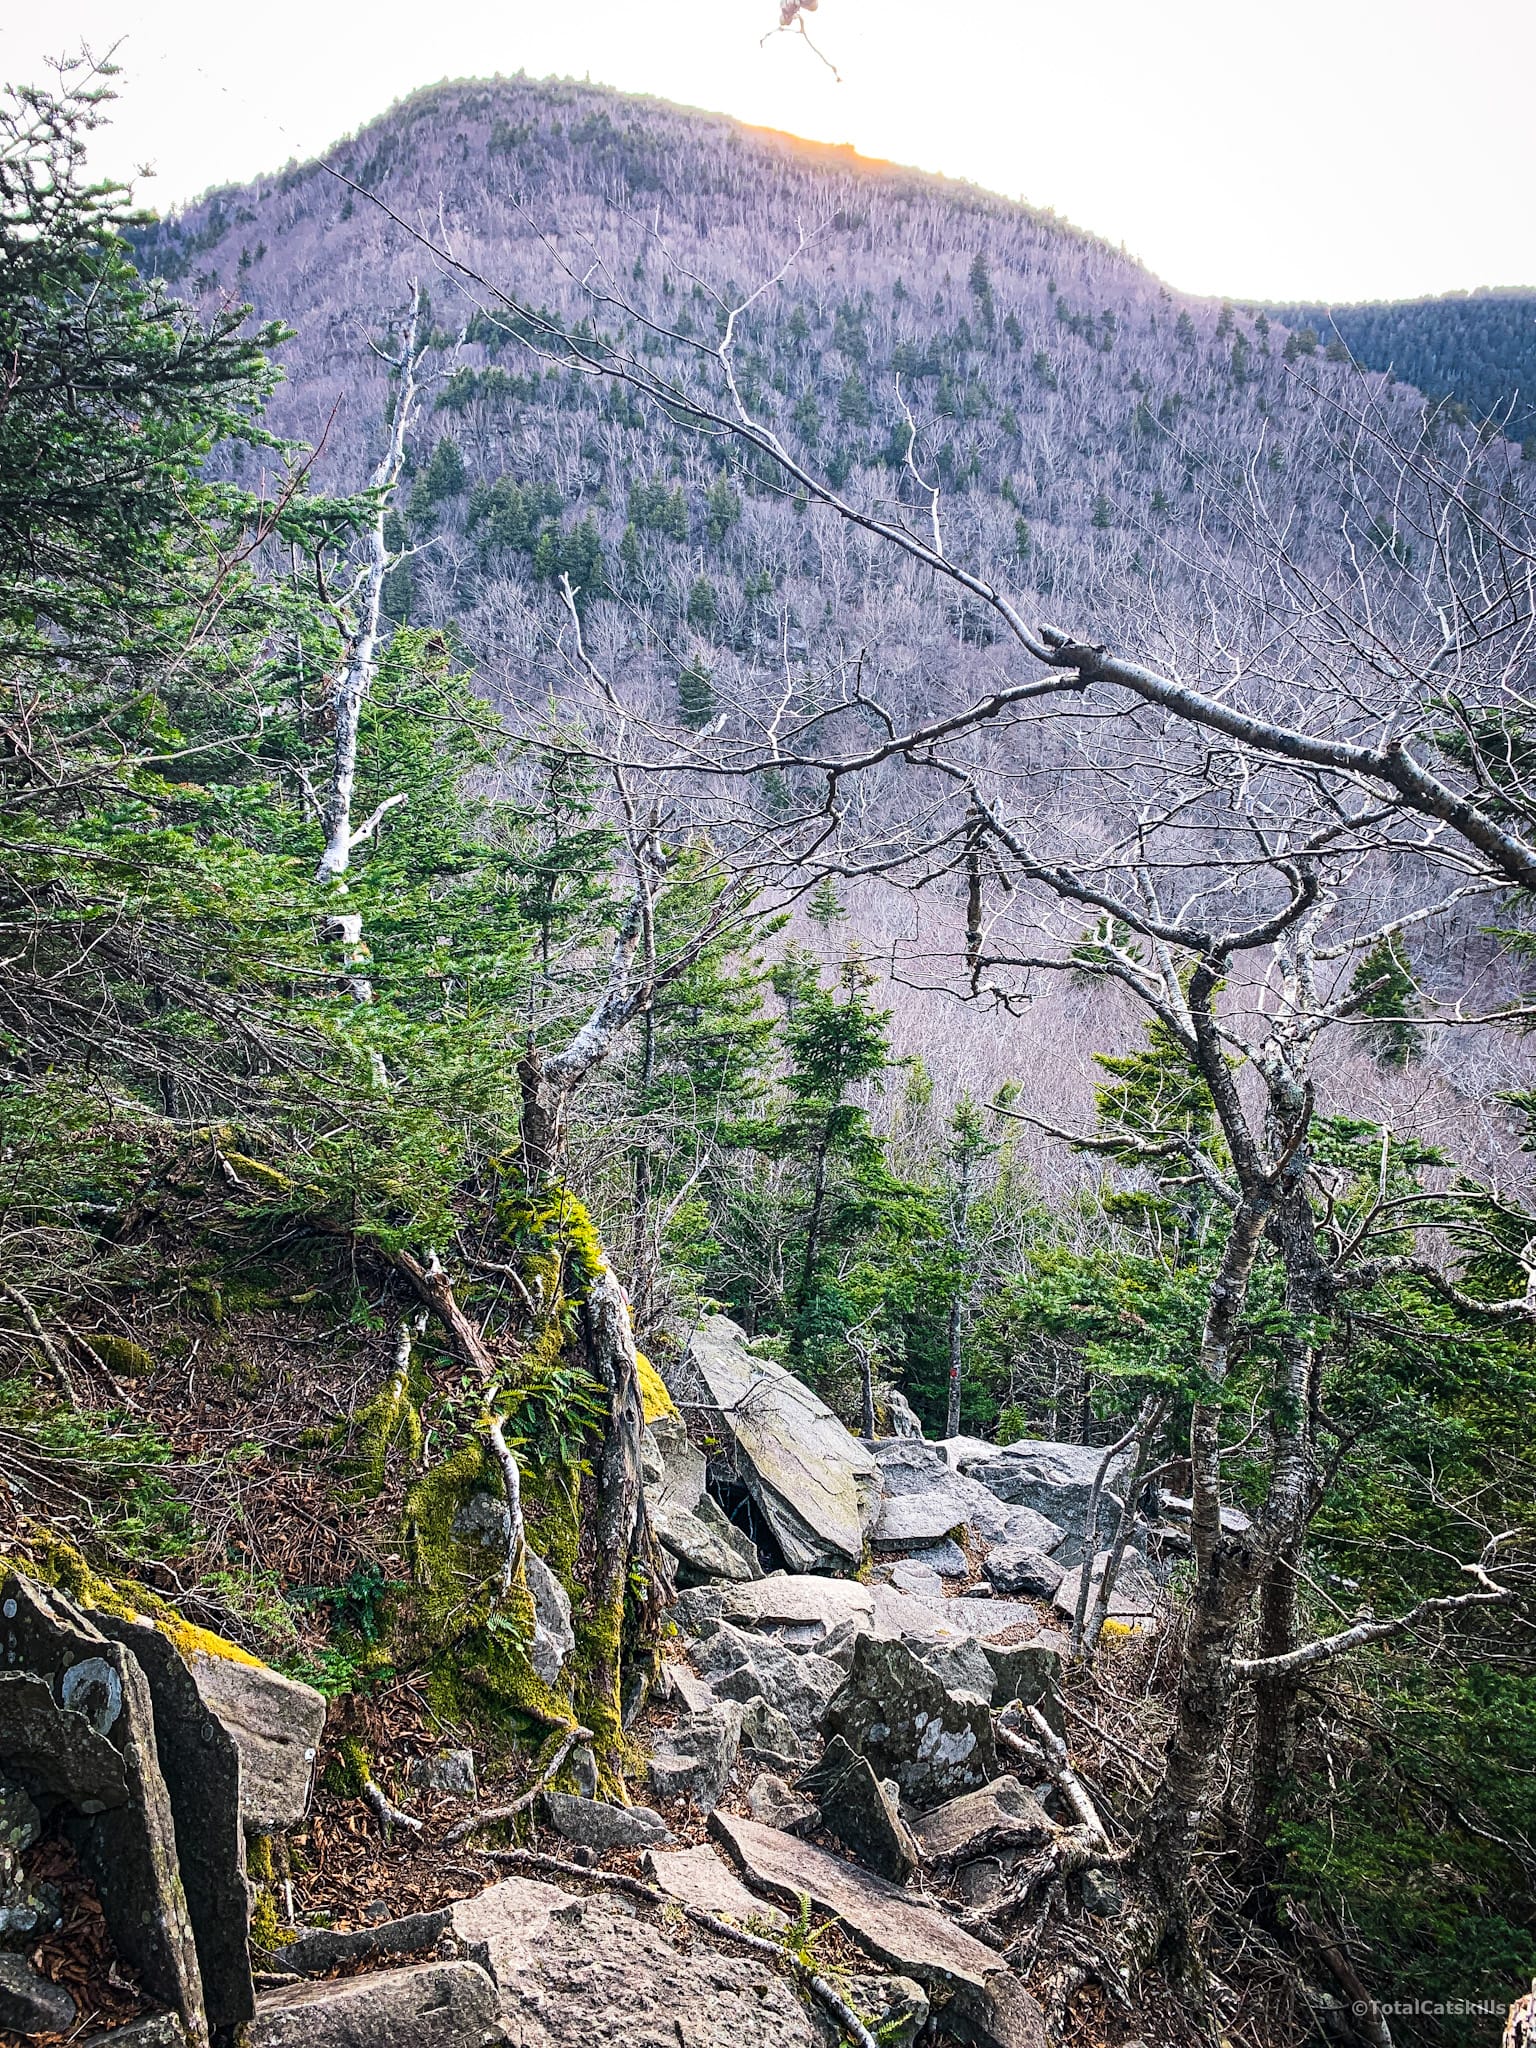 view of sugarloaf mountain and rugged hiking trail